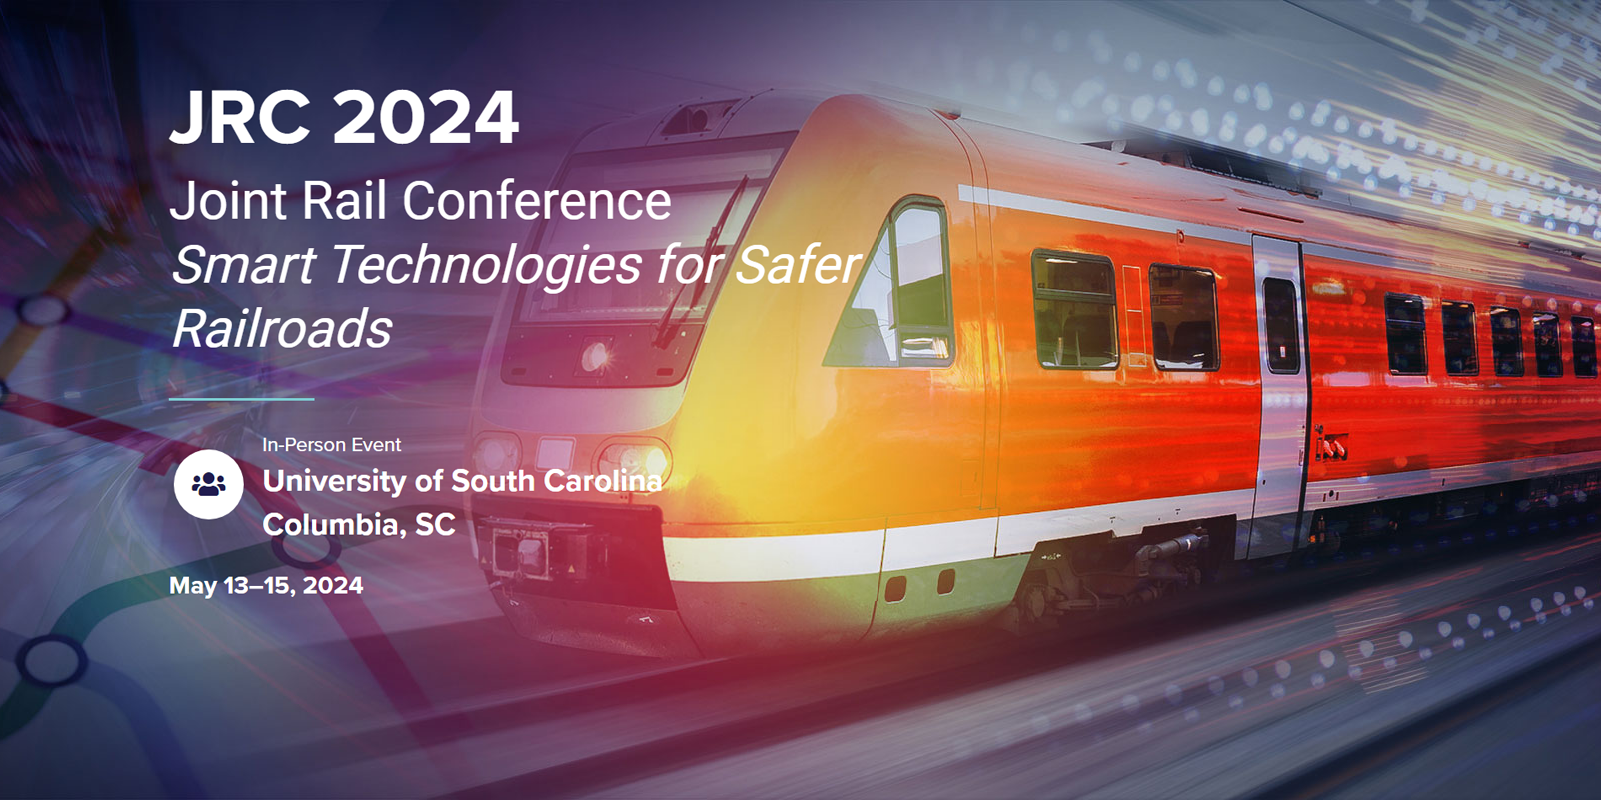 Joint Rail Conference (JRC) Smart Technologies for Safer Railroads, In-person event University of South Carolina, Columbia, SC, May 13-15, 2024